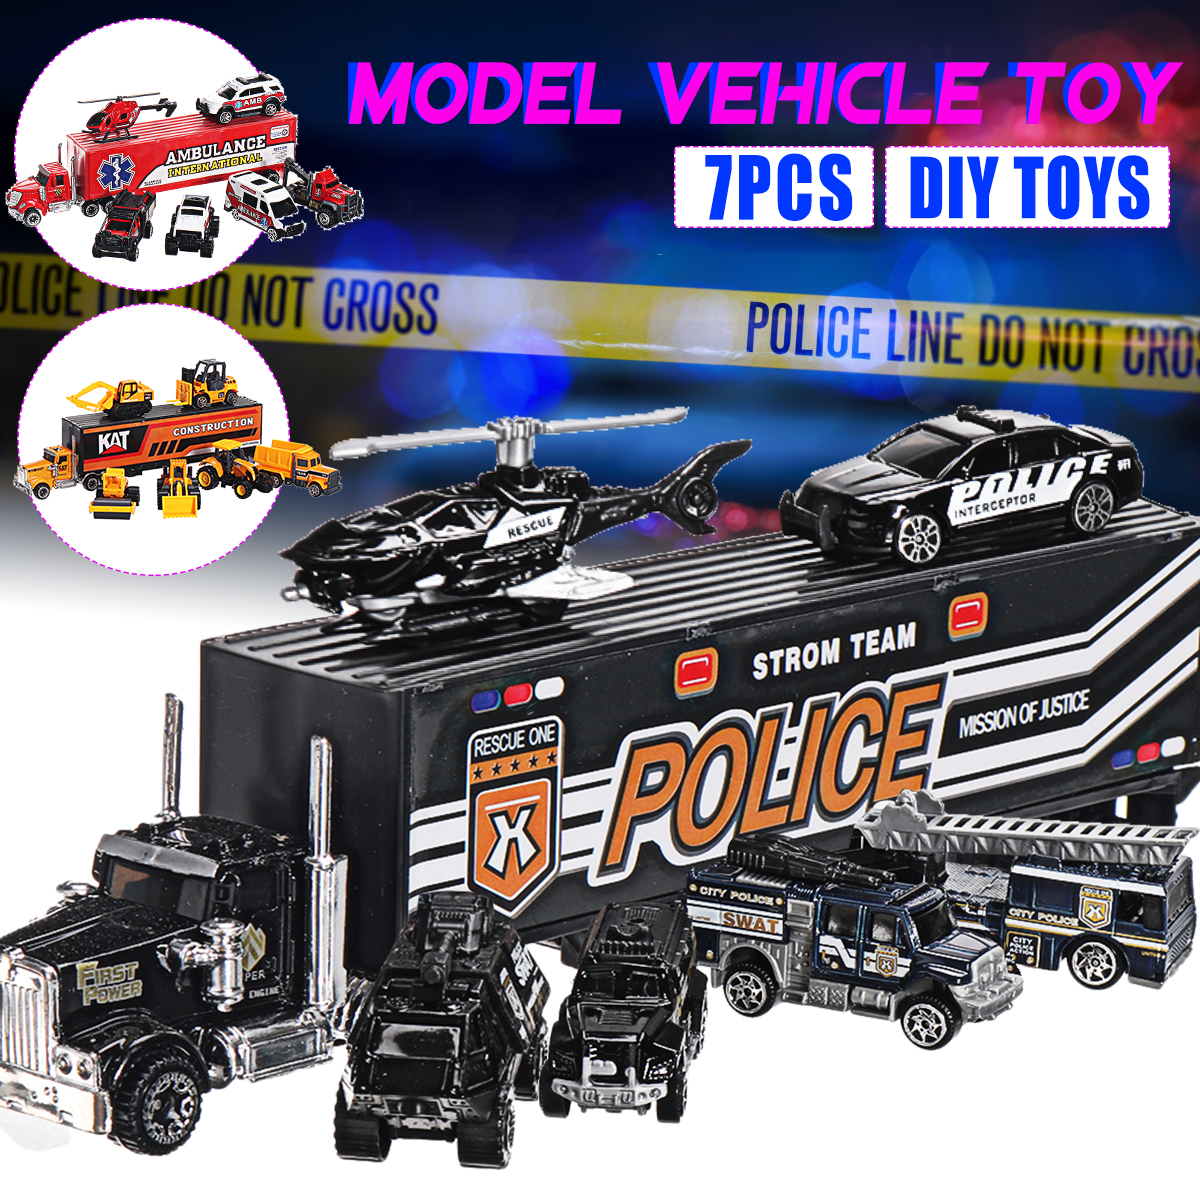 7-PCS-Alloy-Plastic-Diecast-Engineering-Vehicle-Ambulance-Polices-Car-Model-Toy-Set-for-Children-Gif-1769432-1